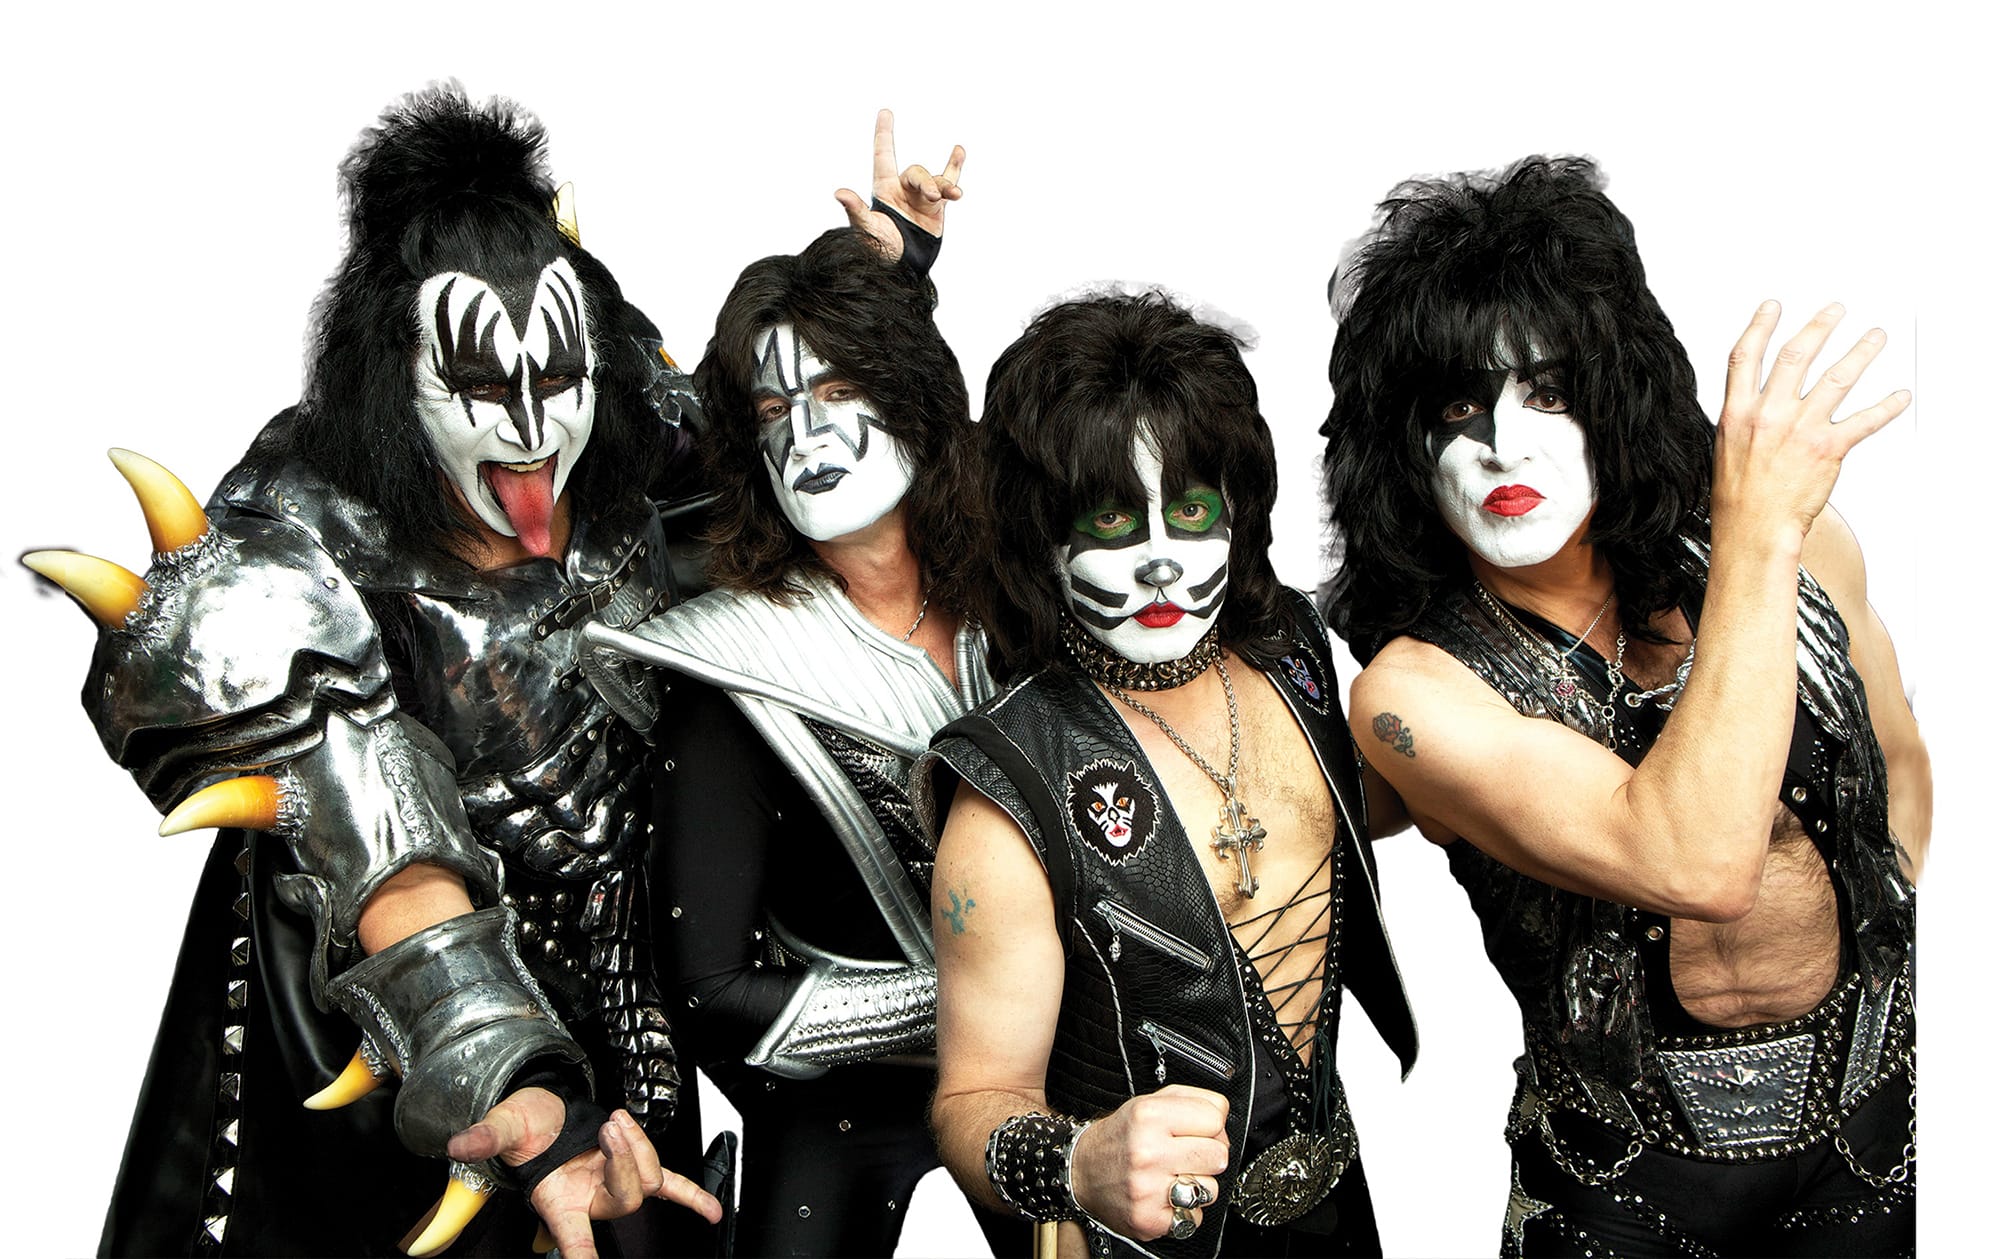 Iconic rockers Kiss will perform with Def Leppard June 27 at the Sleep Country Ampitheater.